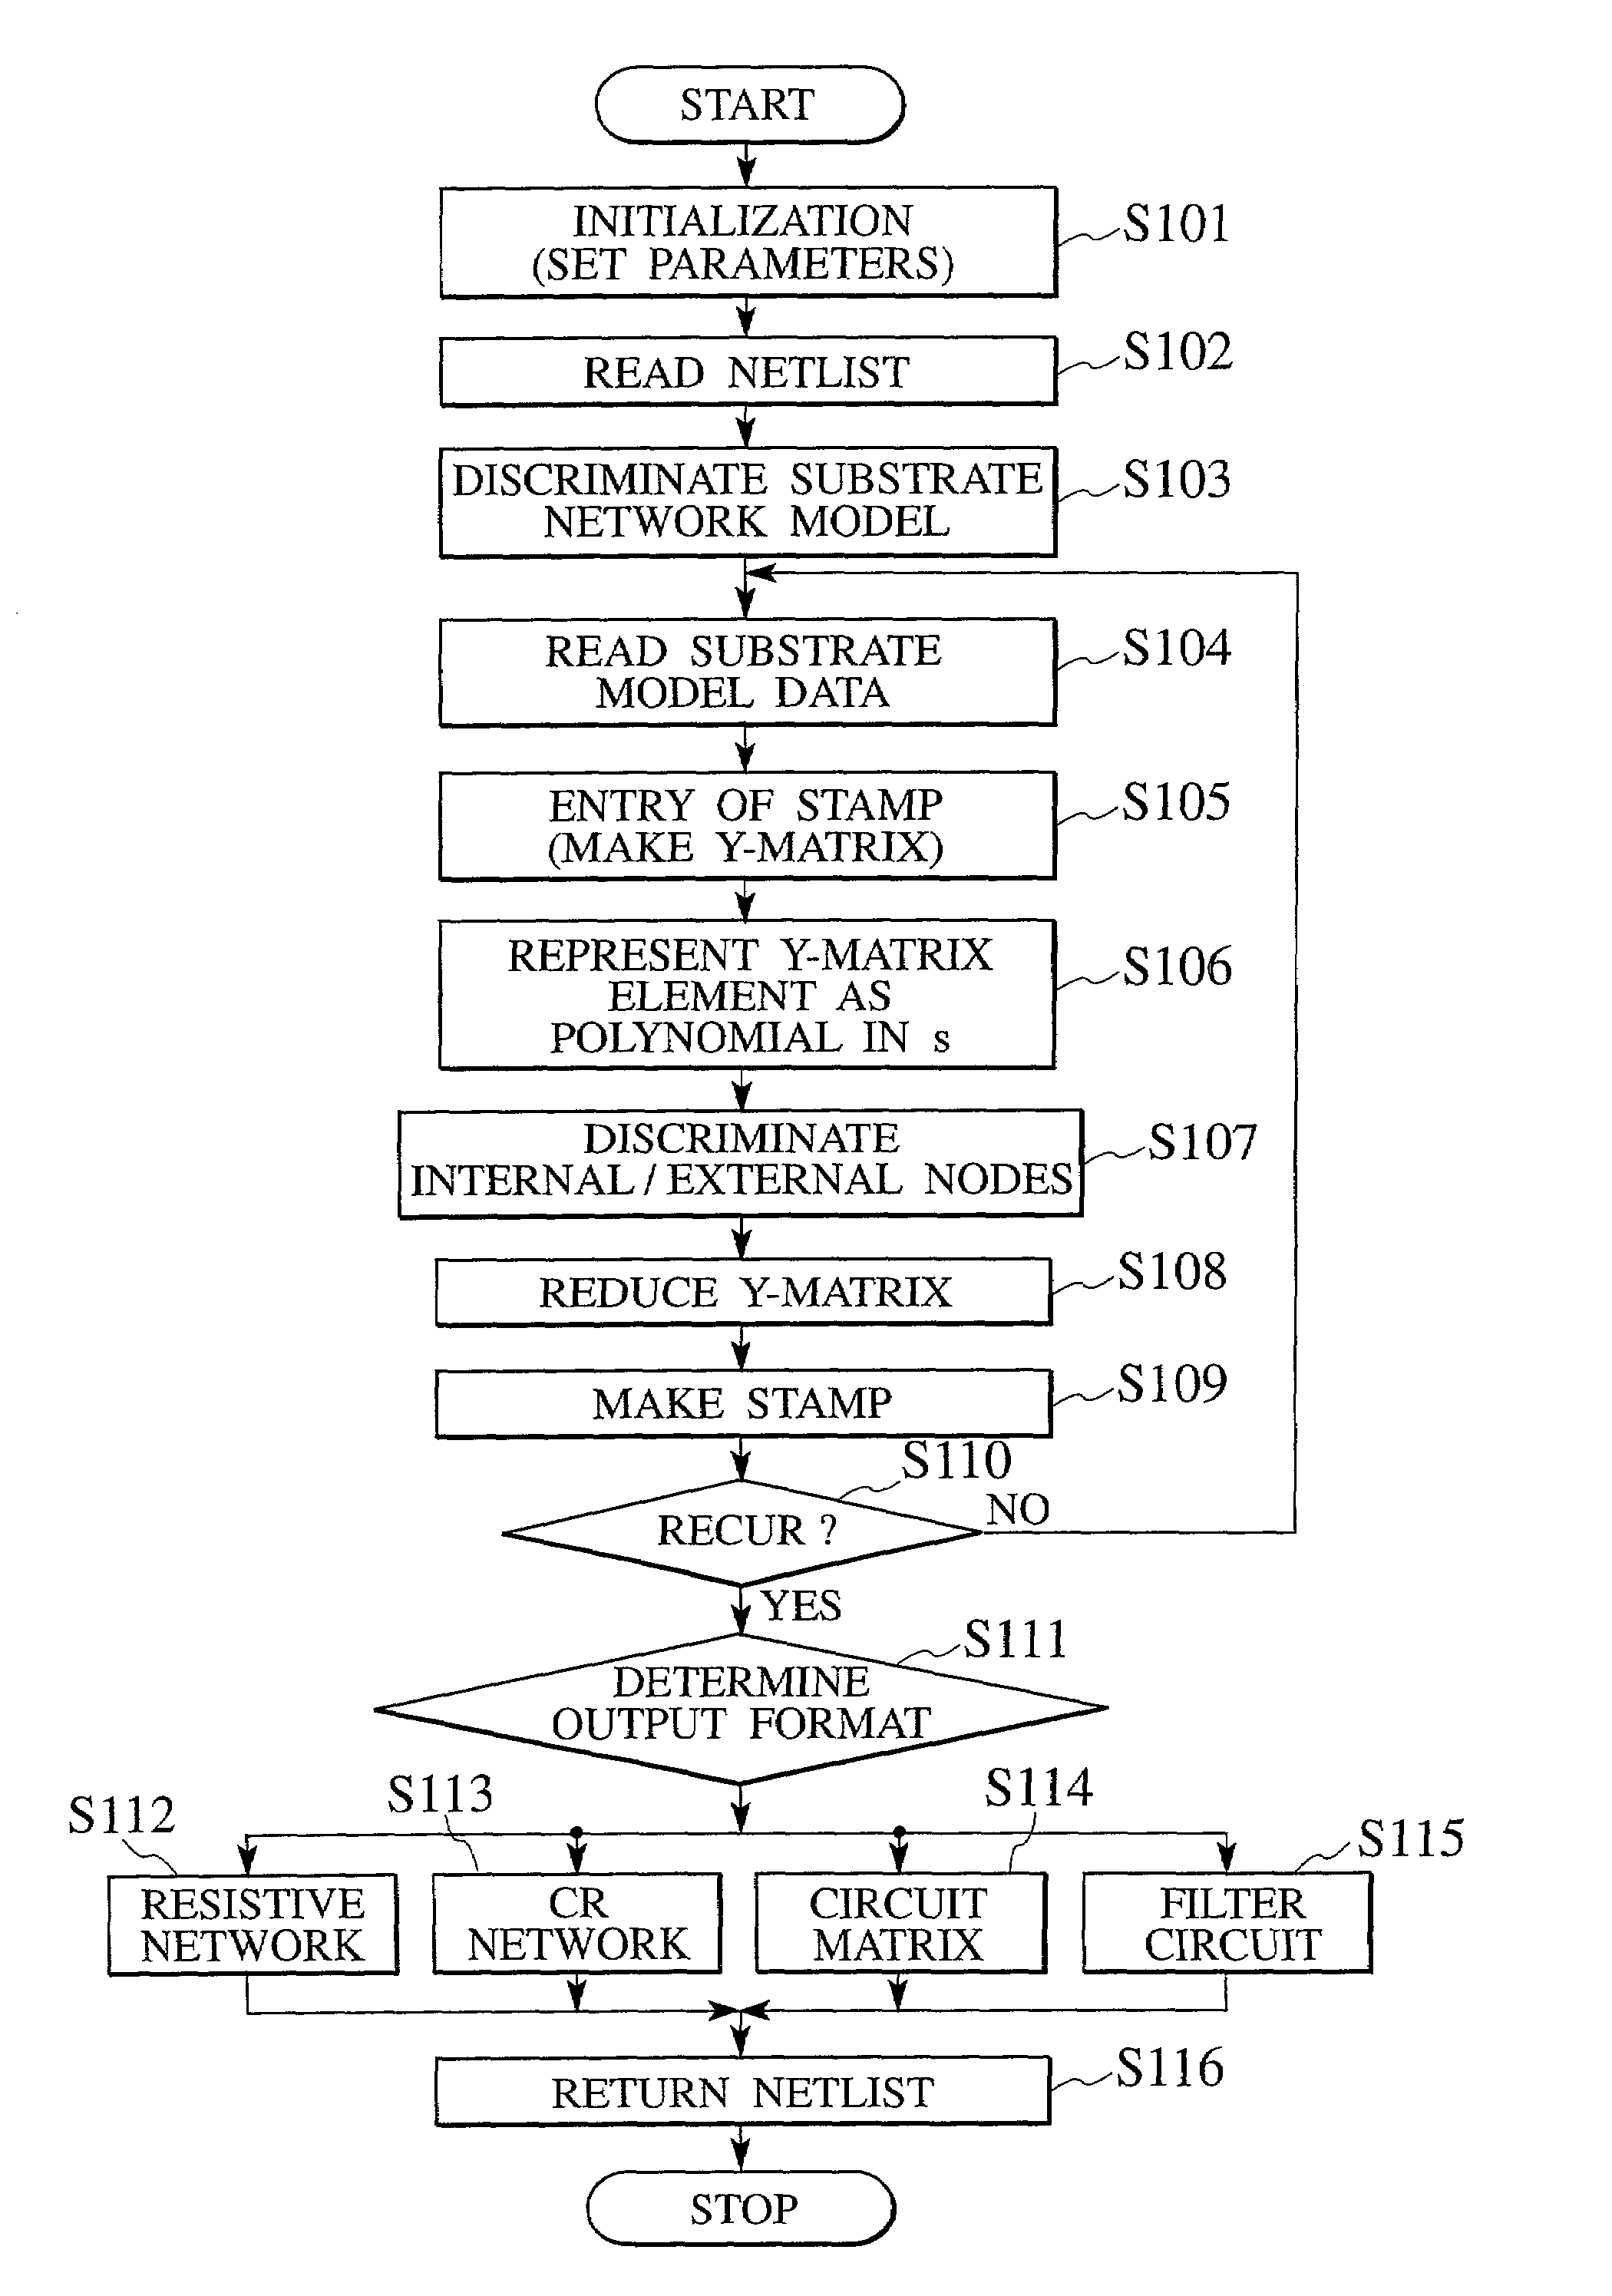 Semiconductor device analyzer, method for analyzing/manufacturing semiconductor device, and storage medium storing program for analyzing semiconductor device